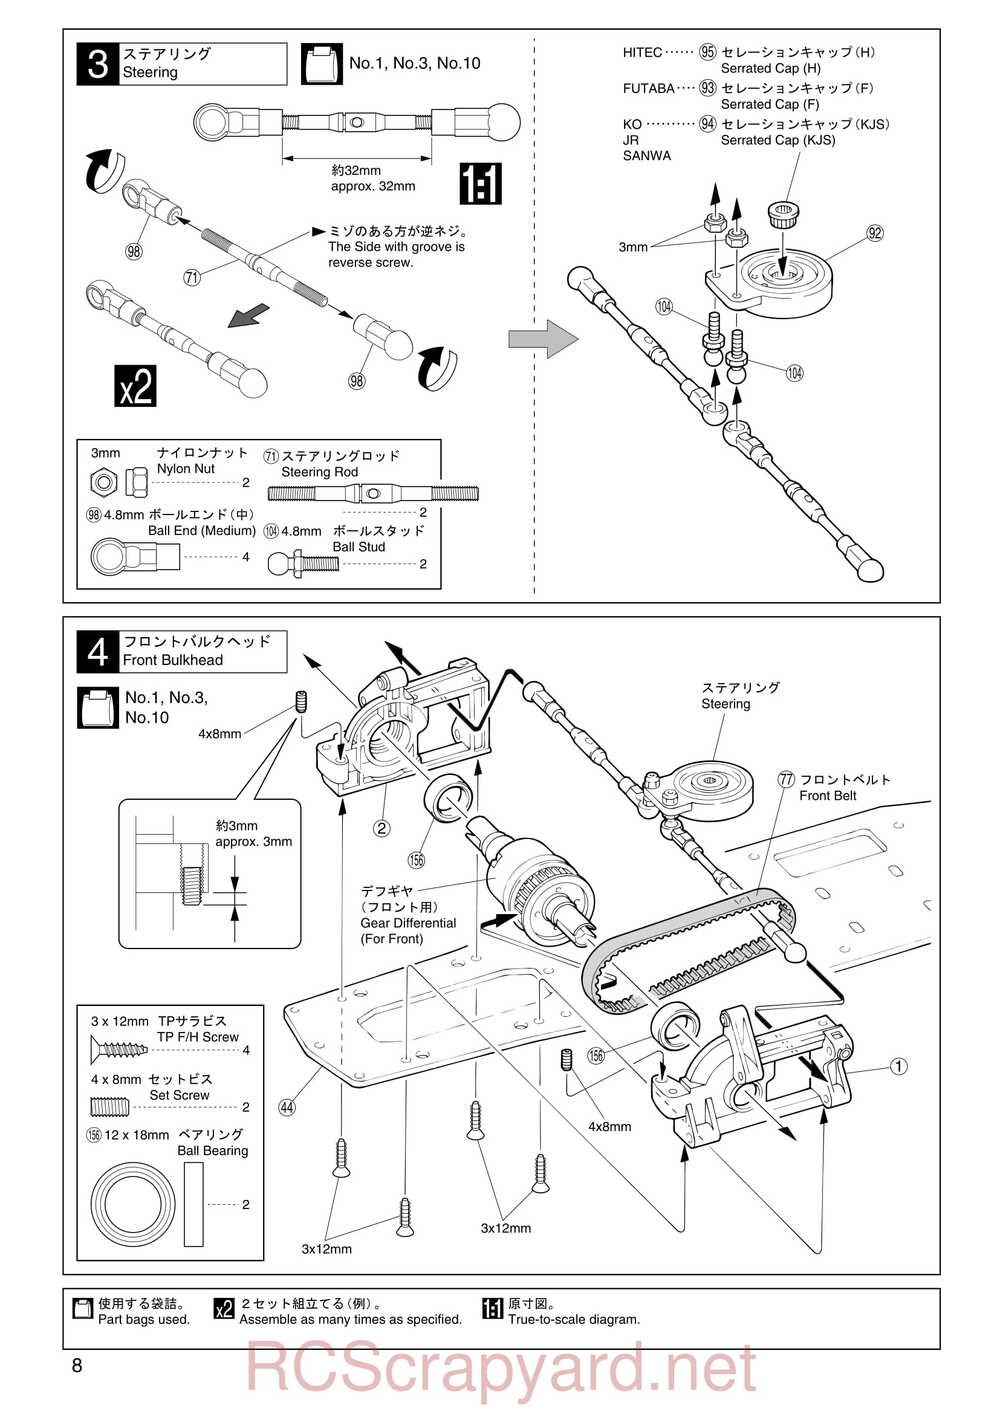 Kyosho - 31011 - V-One R - Manual - Page 08